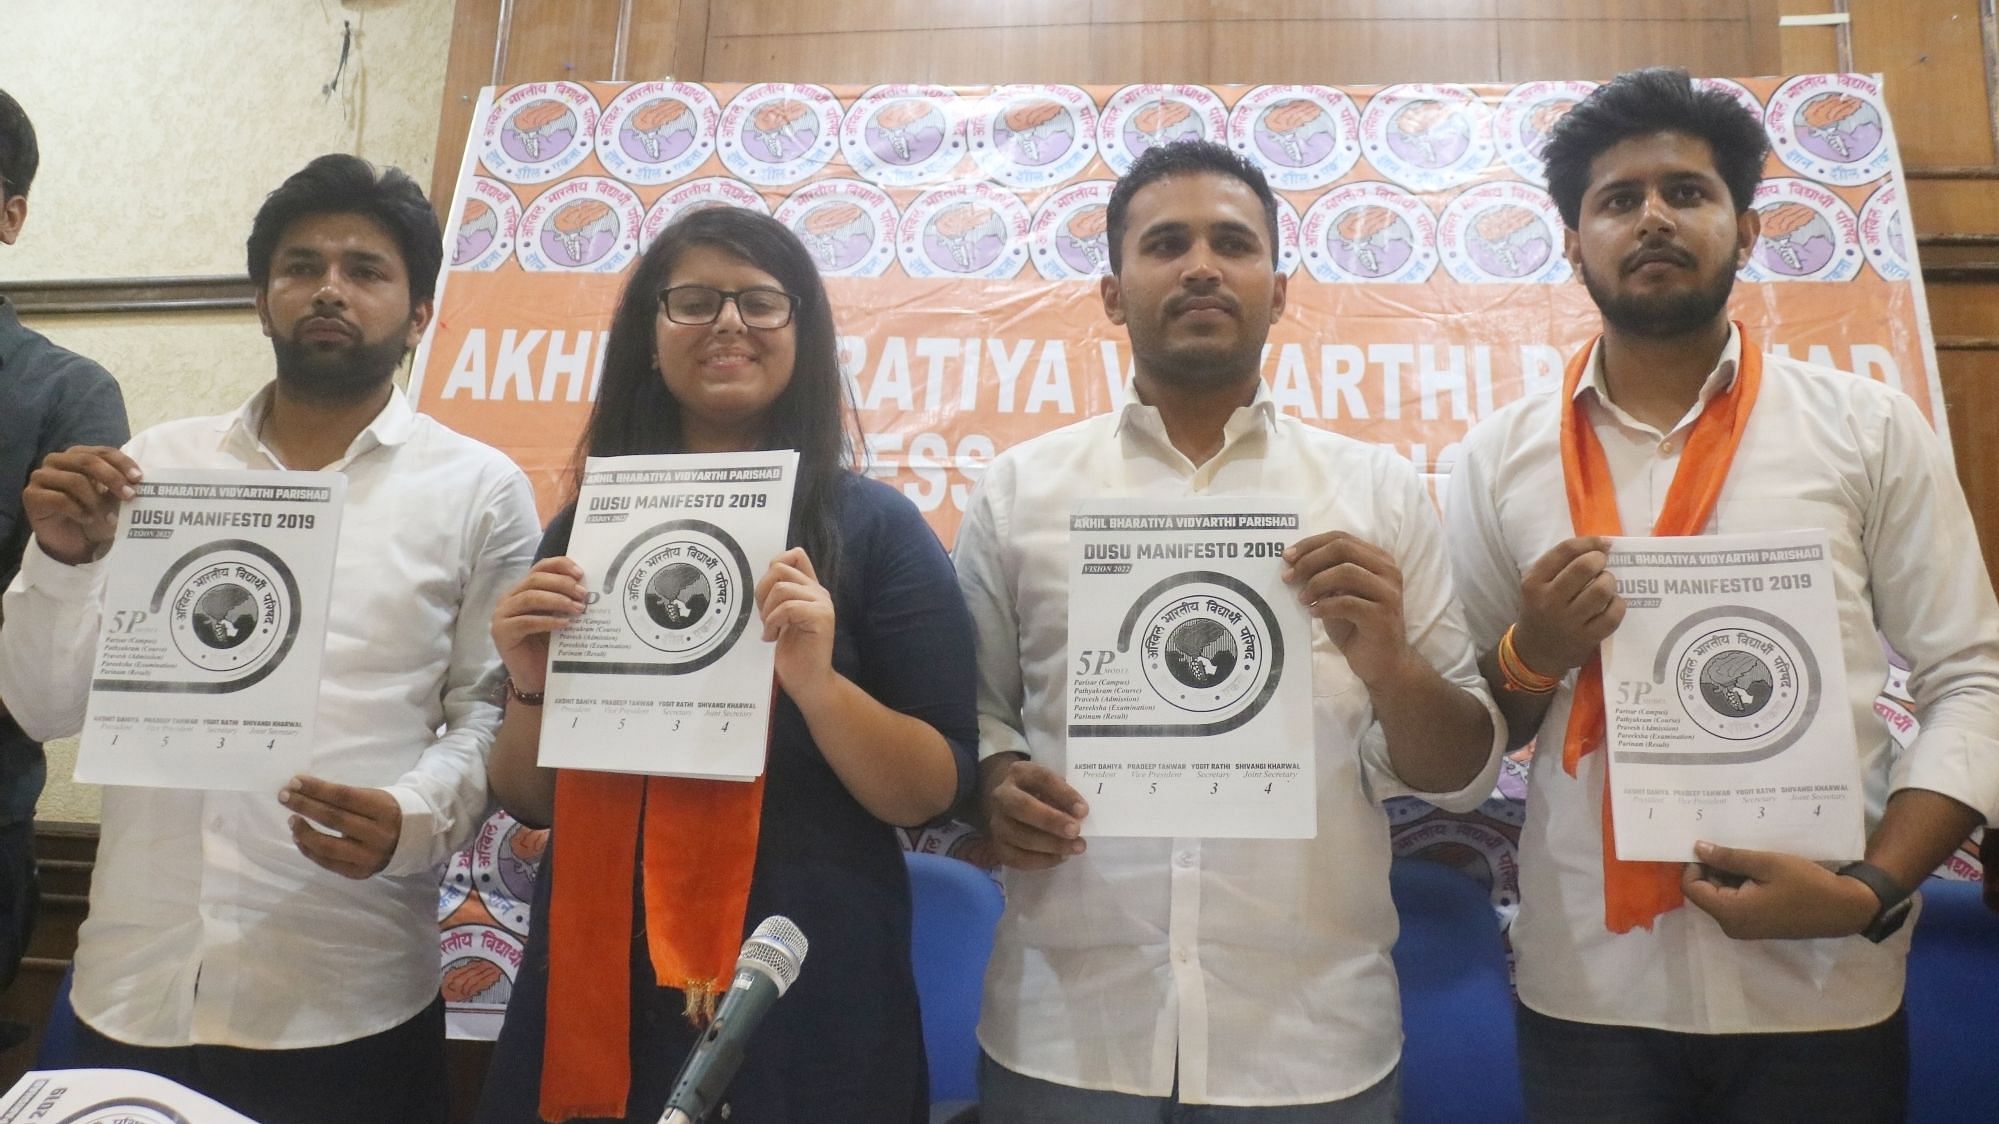 ABVP candidates release their election manifesto for election to Delhi University Students’ Union (DUSU) on 7 September.